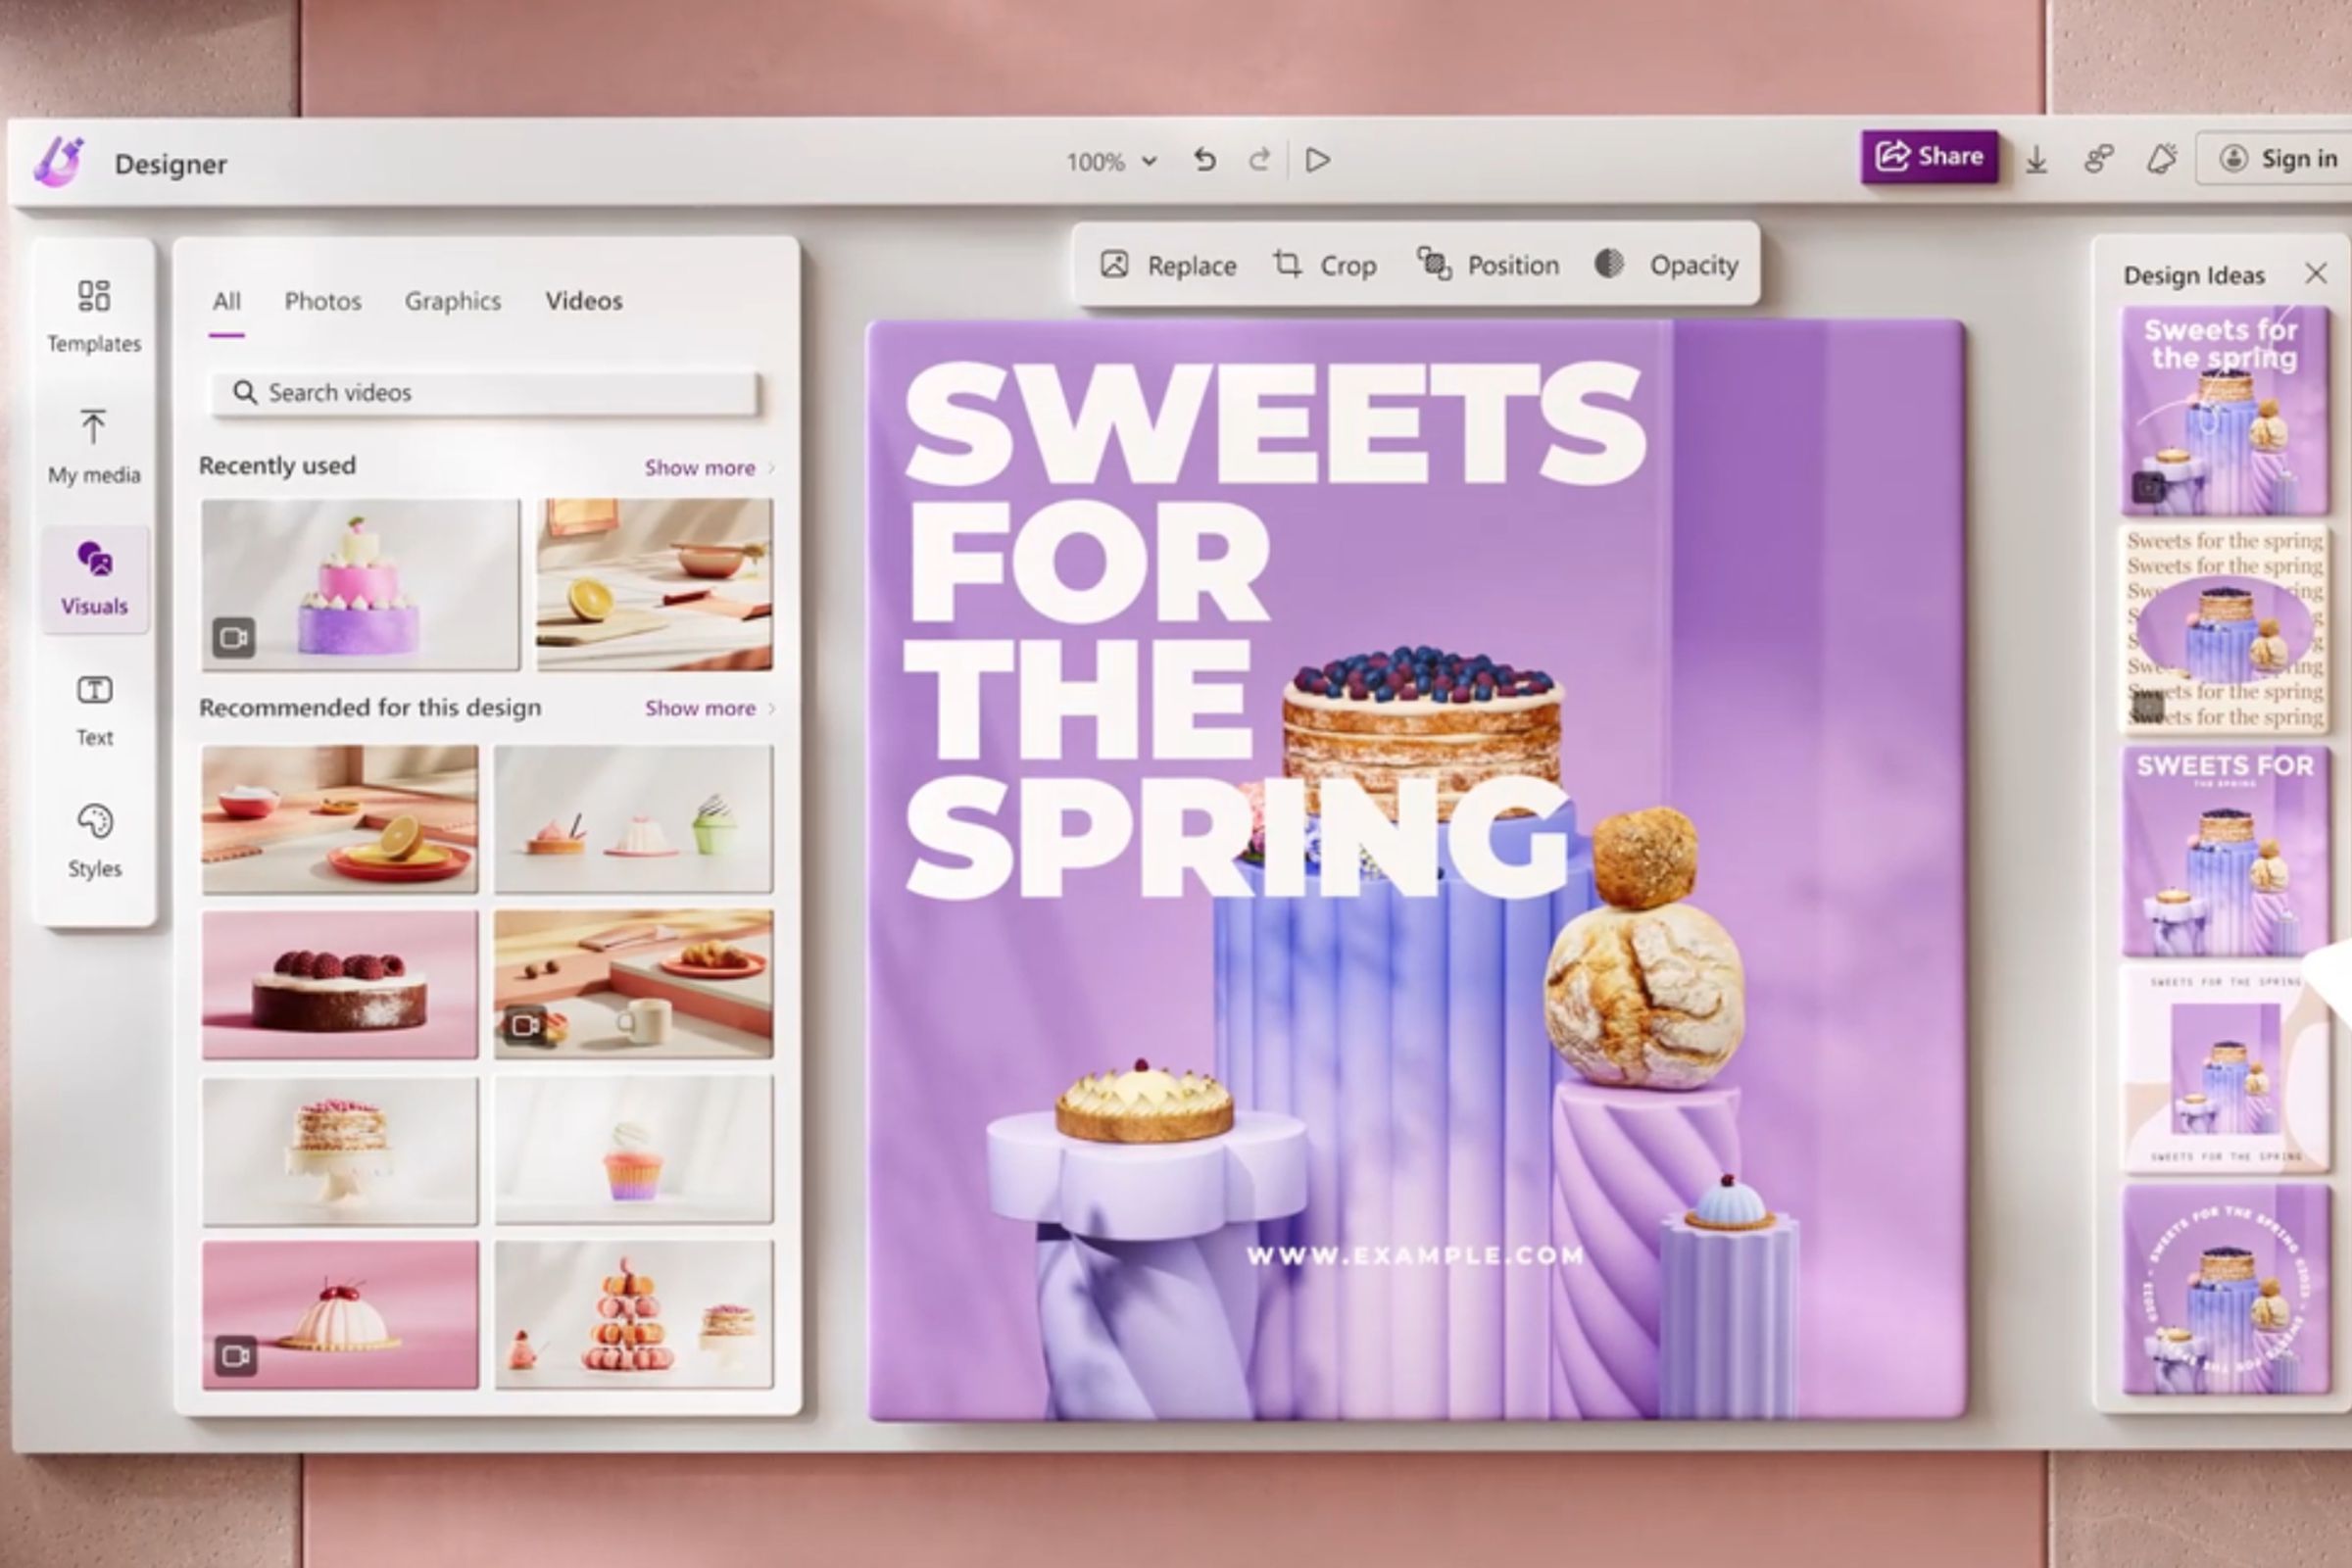 A screenshot of the Microsoft Designer software displaying an ad campign for cakes.